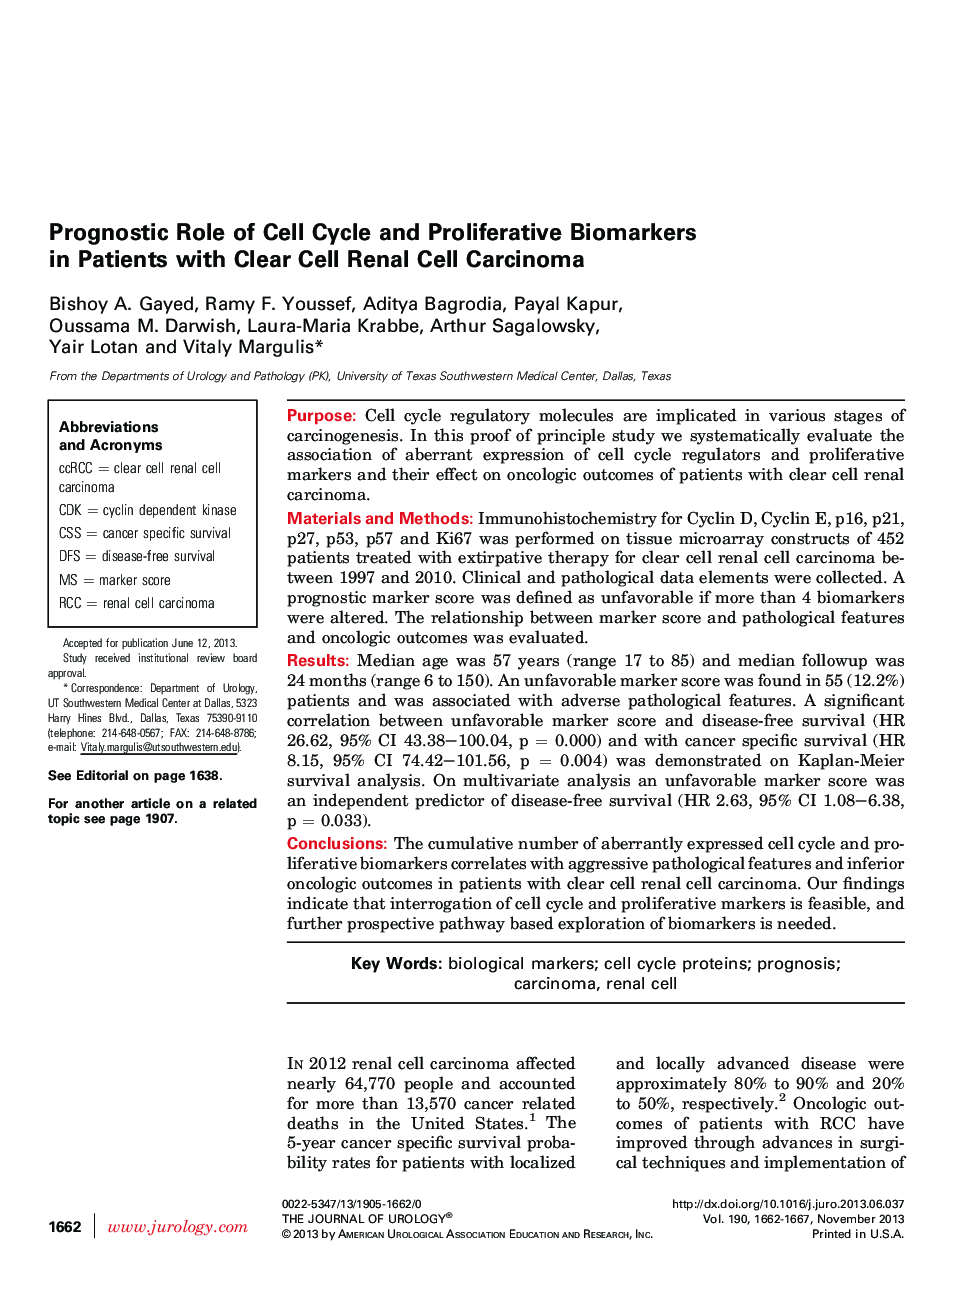 Prognostic Role of Cell Cycle and Proliferative Biomarkers in Patients with Clear Cell Renal Cell Carcinoma